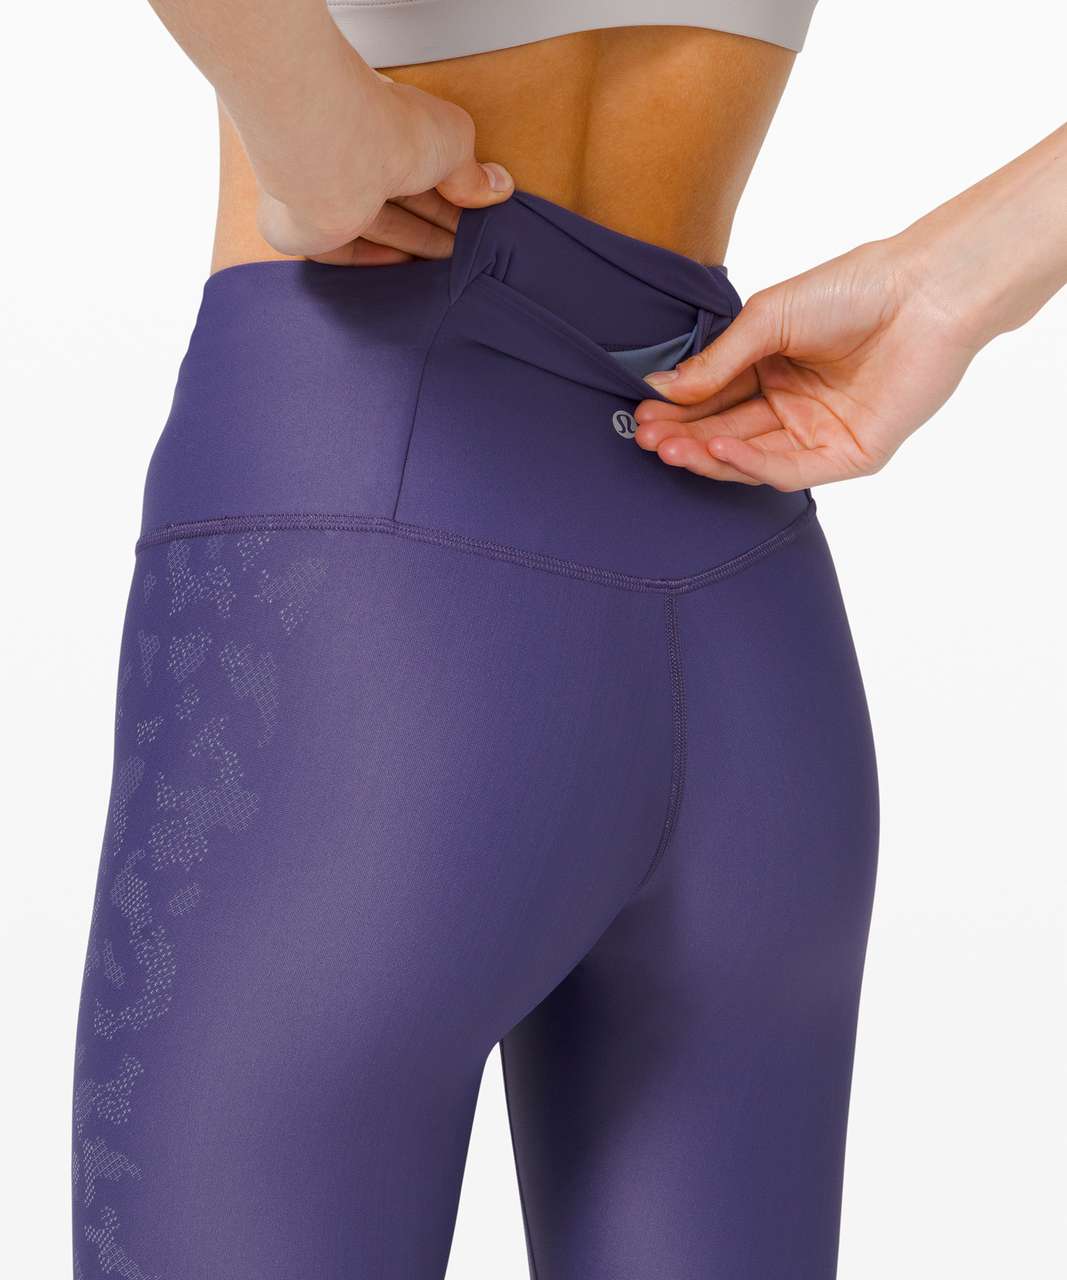 Lululemon Mapped Out High Rise Tight 28" *Camo - Midnight Orchid / Peri Purple